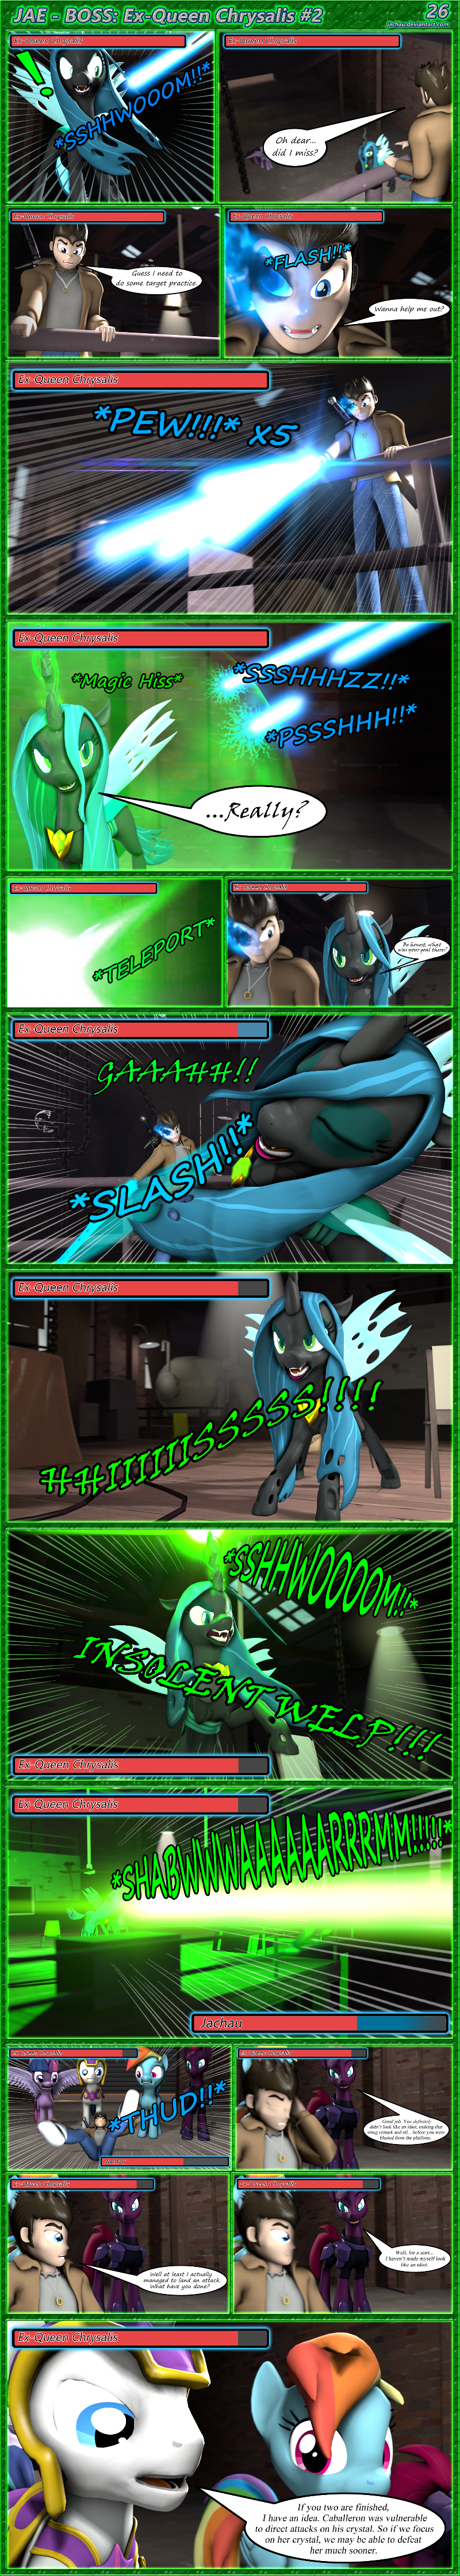 Page 26: BOSS: Ex-Queen Chrysalis Part 2